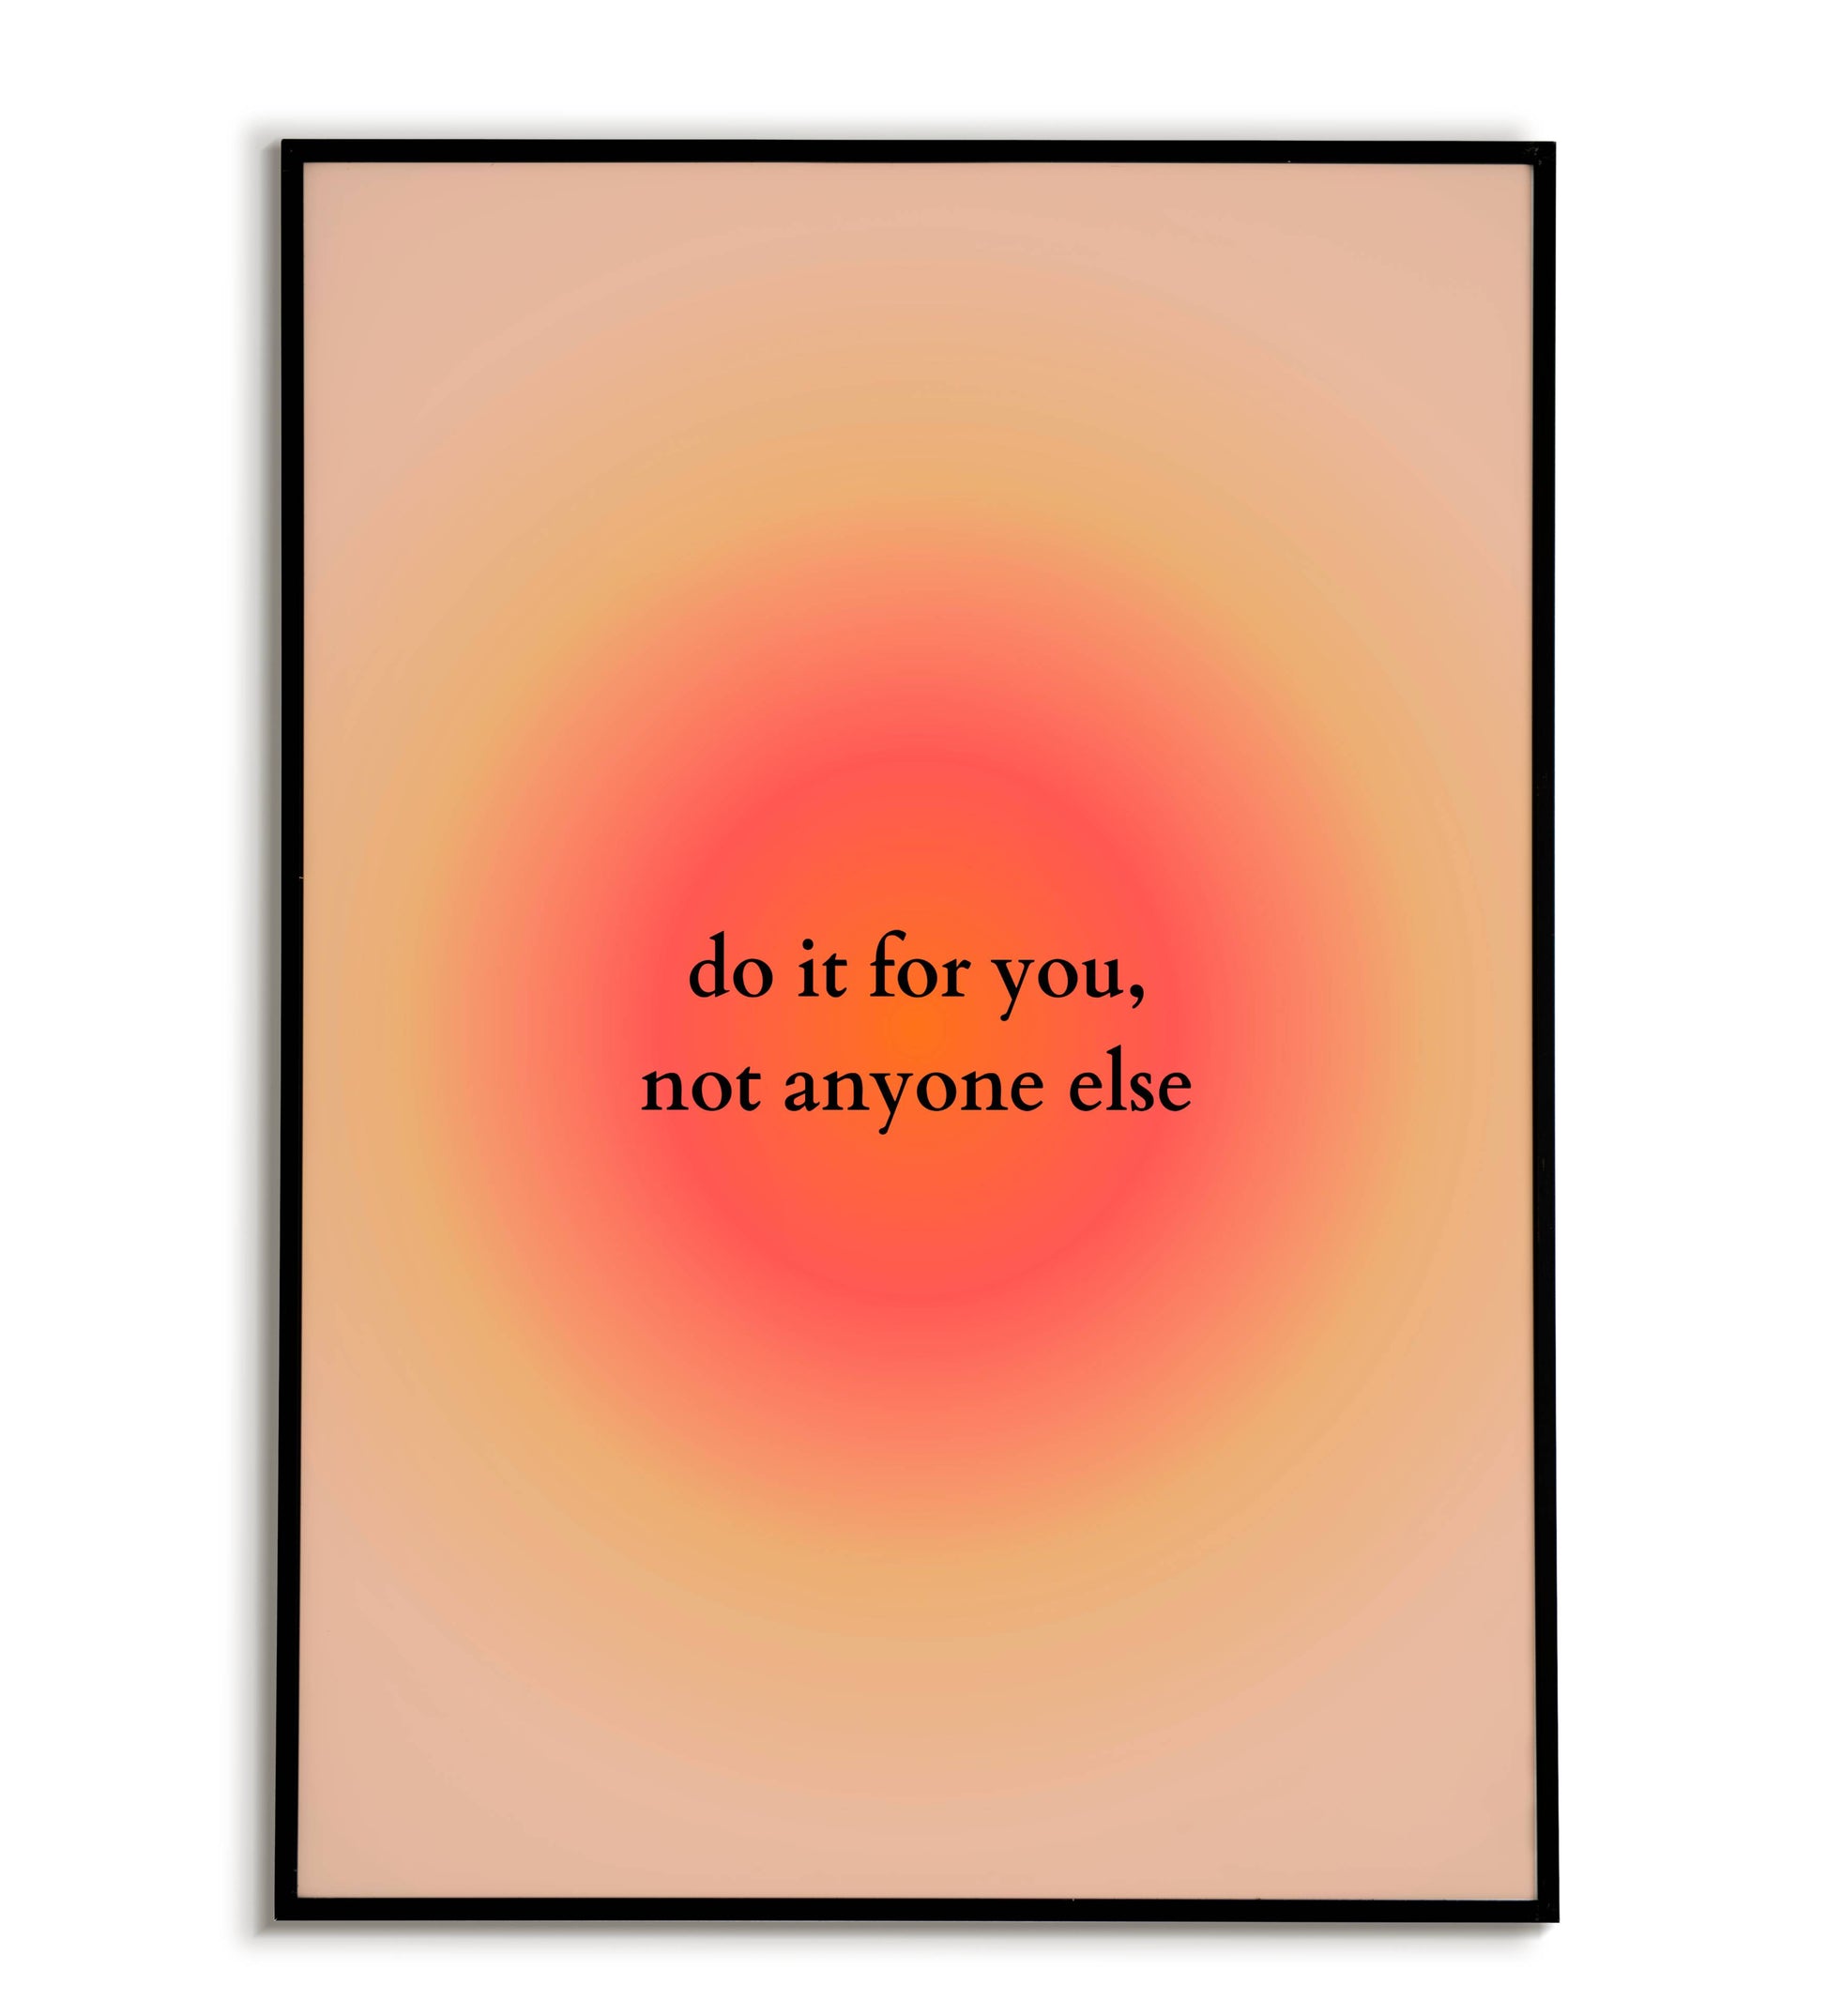 "Do it for you not anyone else" printable motivational poster.